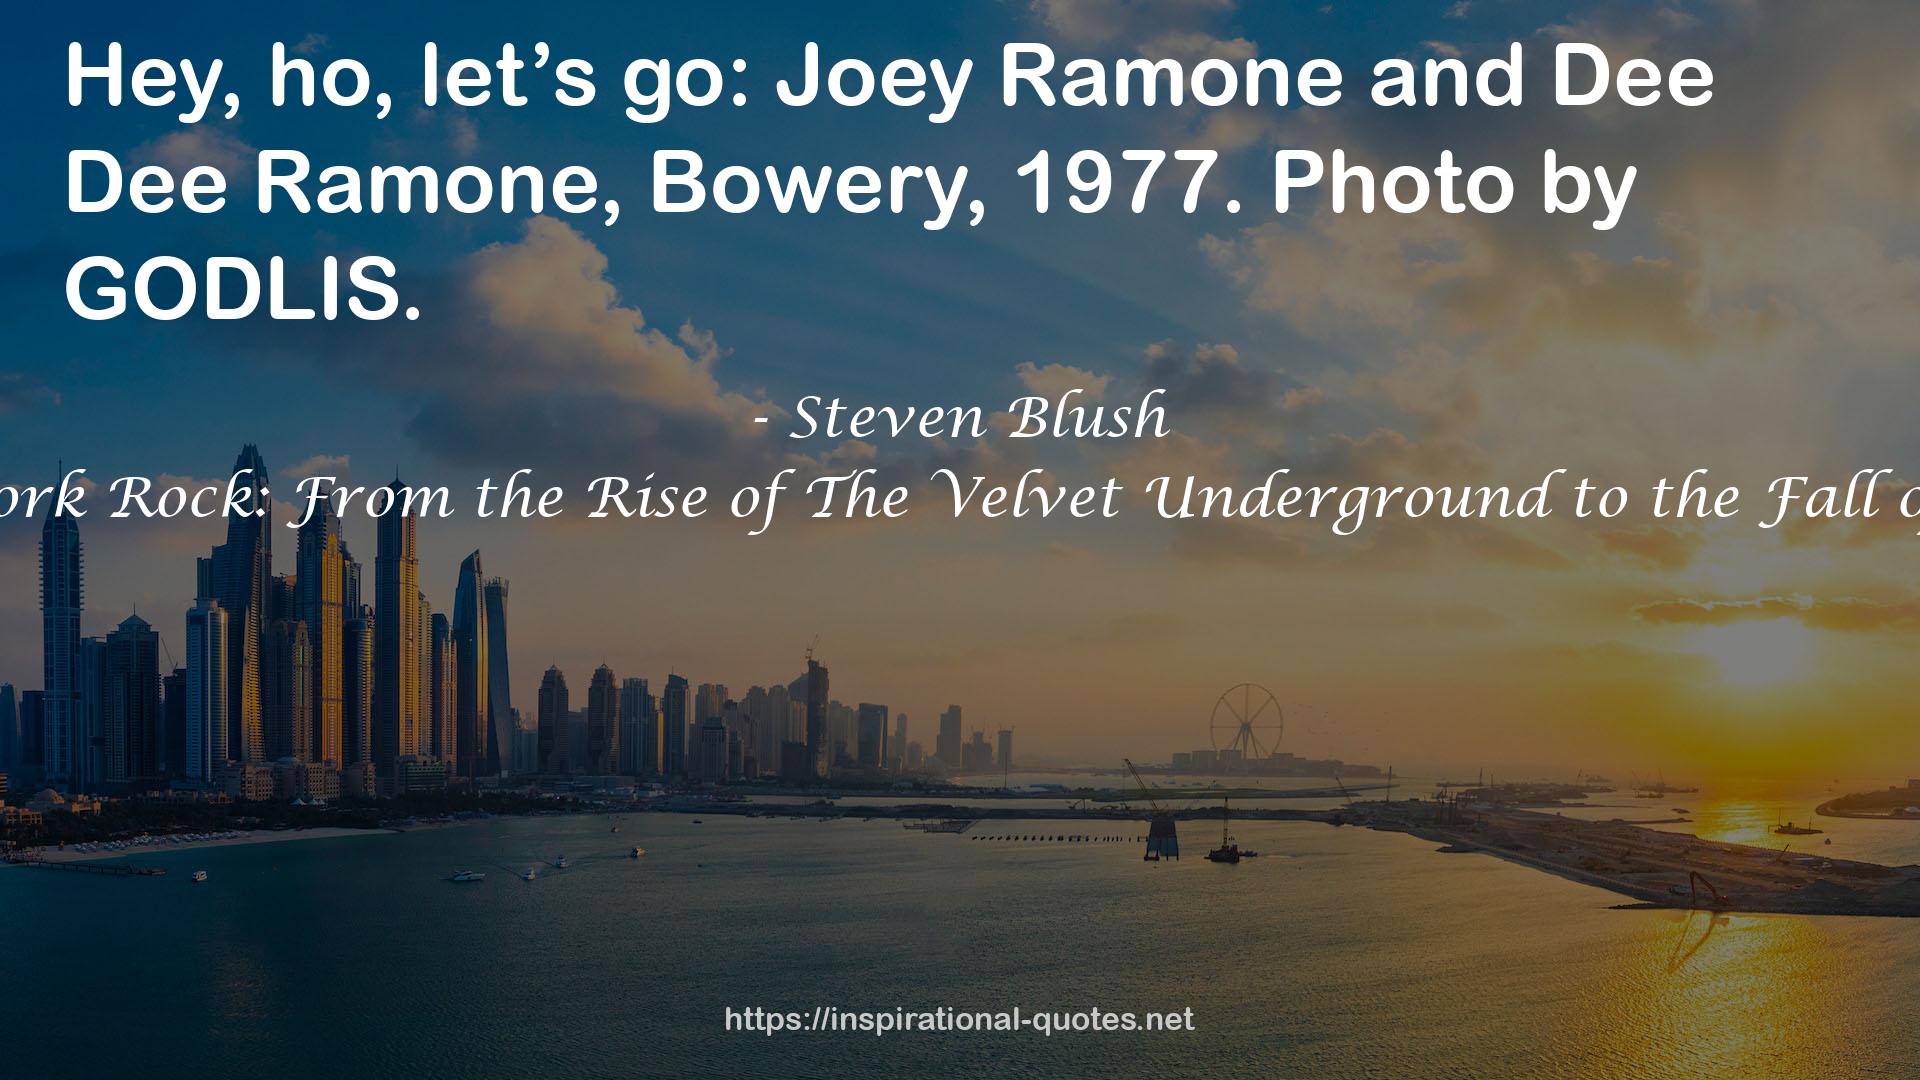 New York Rock: From the Rise of The Velvet Underground to the Fall of CBGB QUOTES